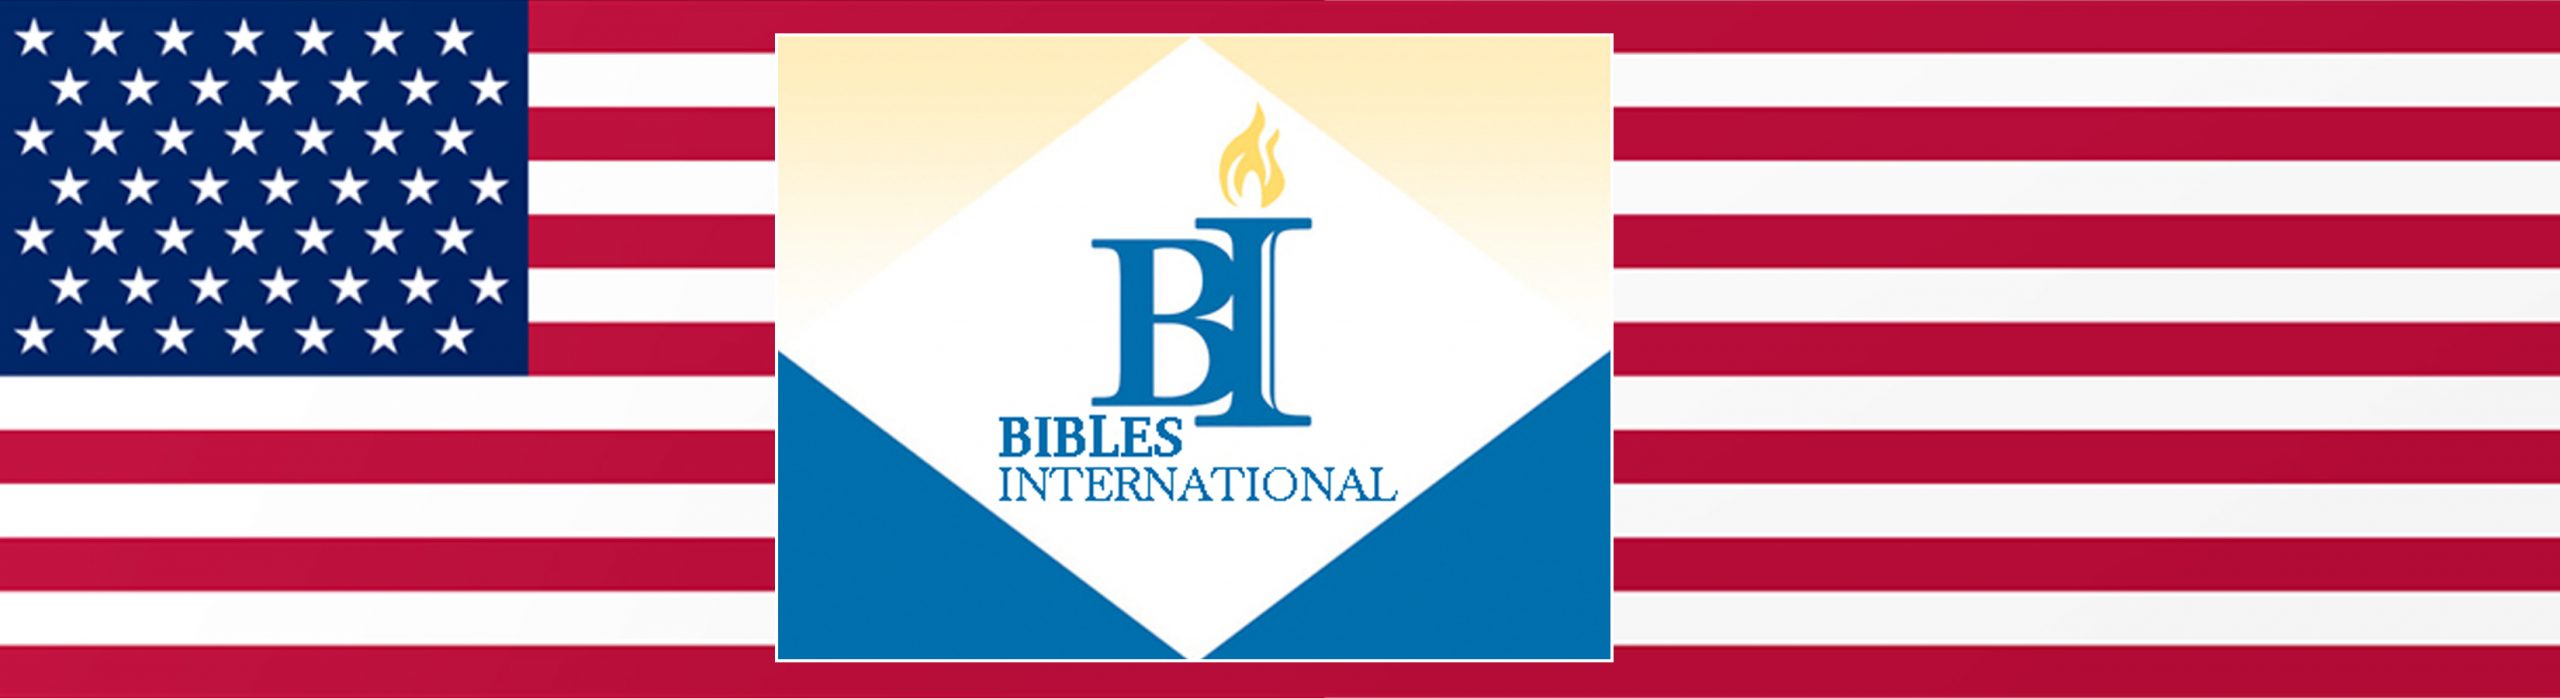 MISSIONARY_Bible-Int